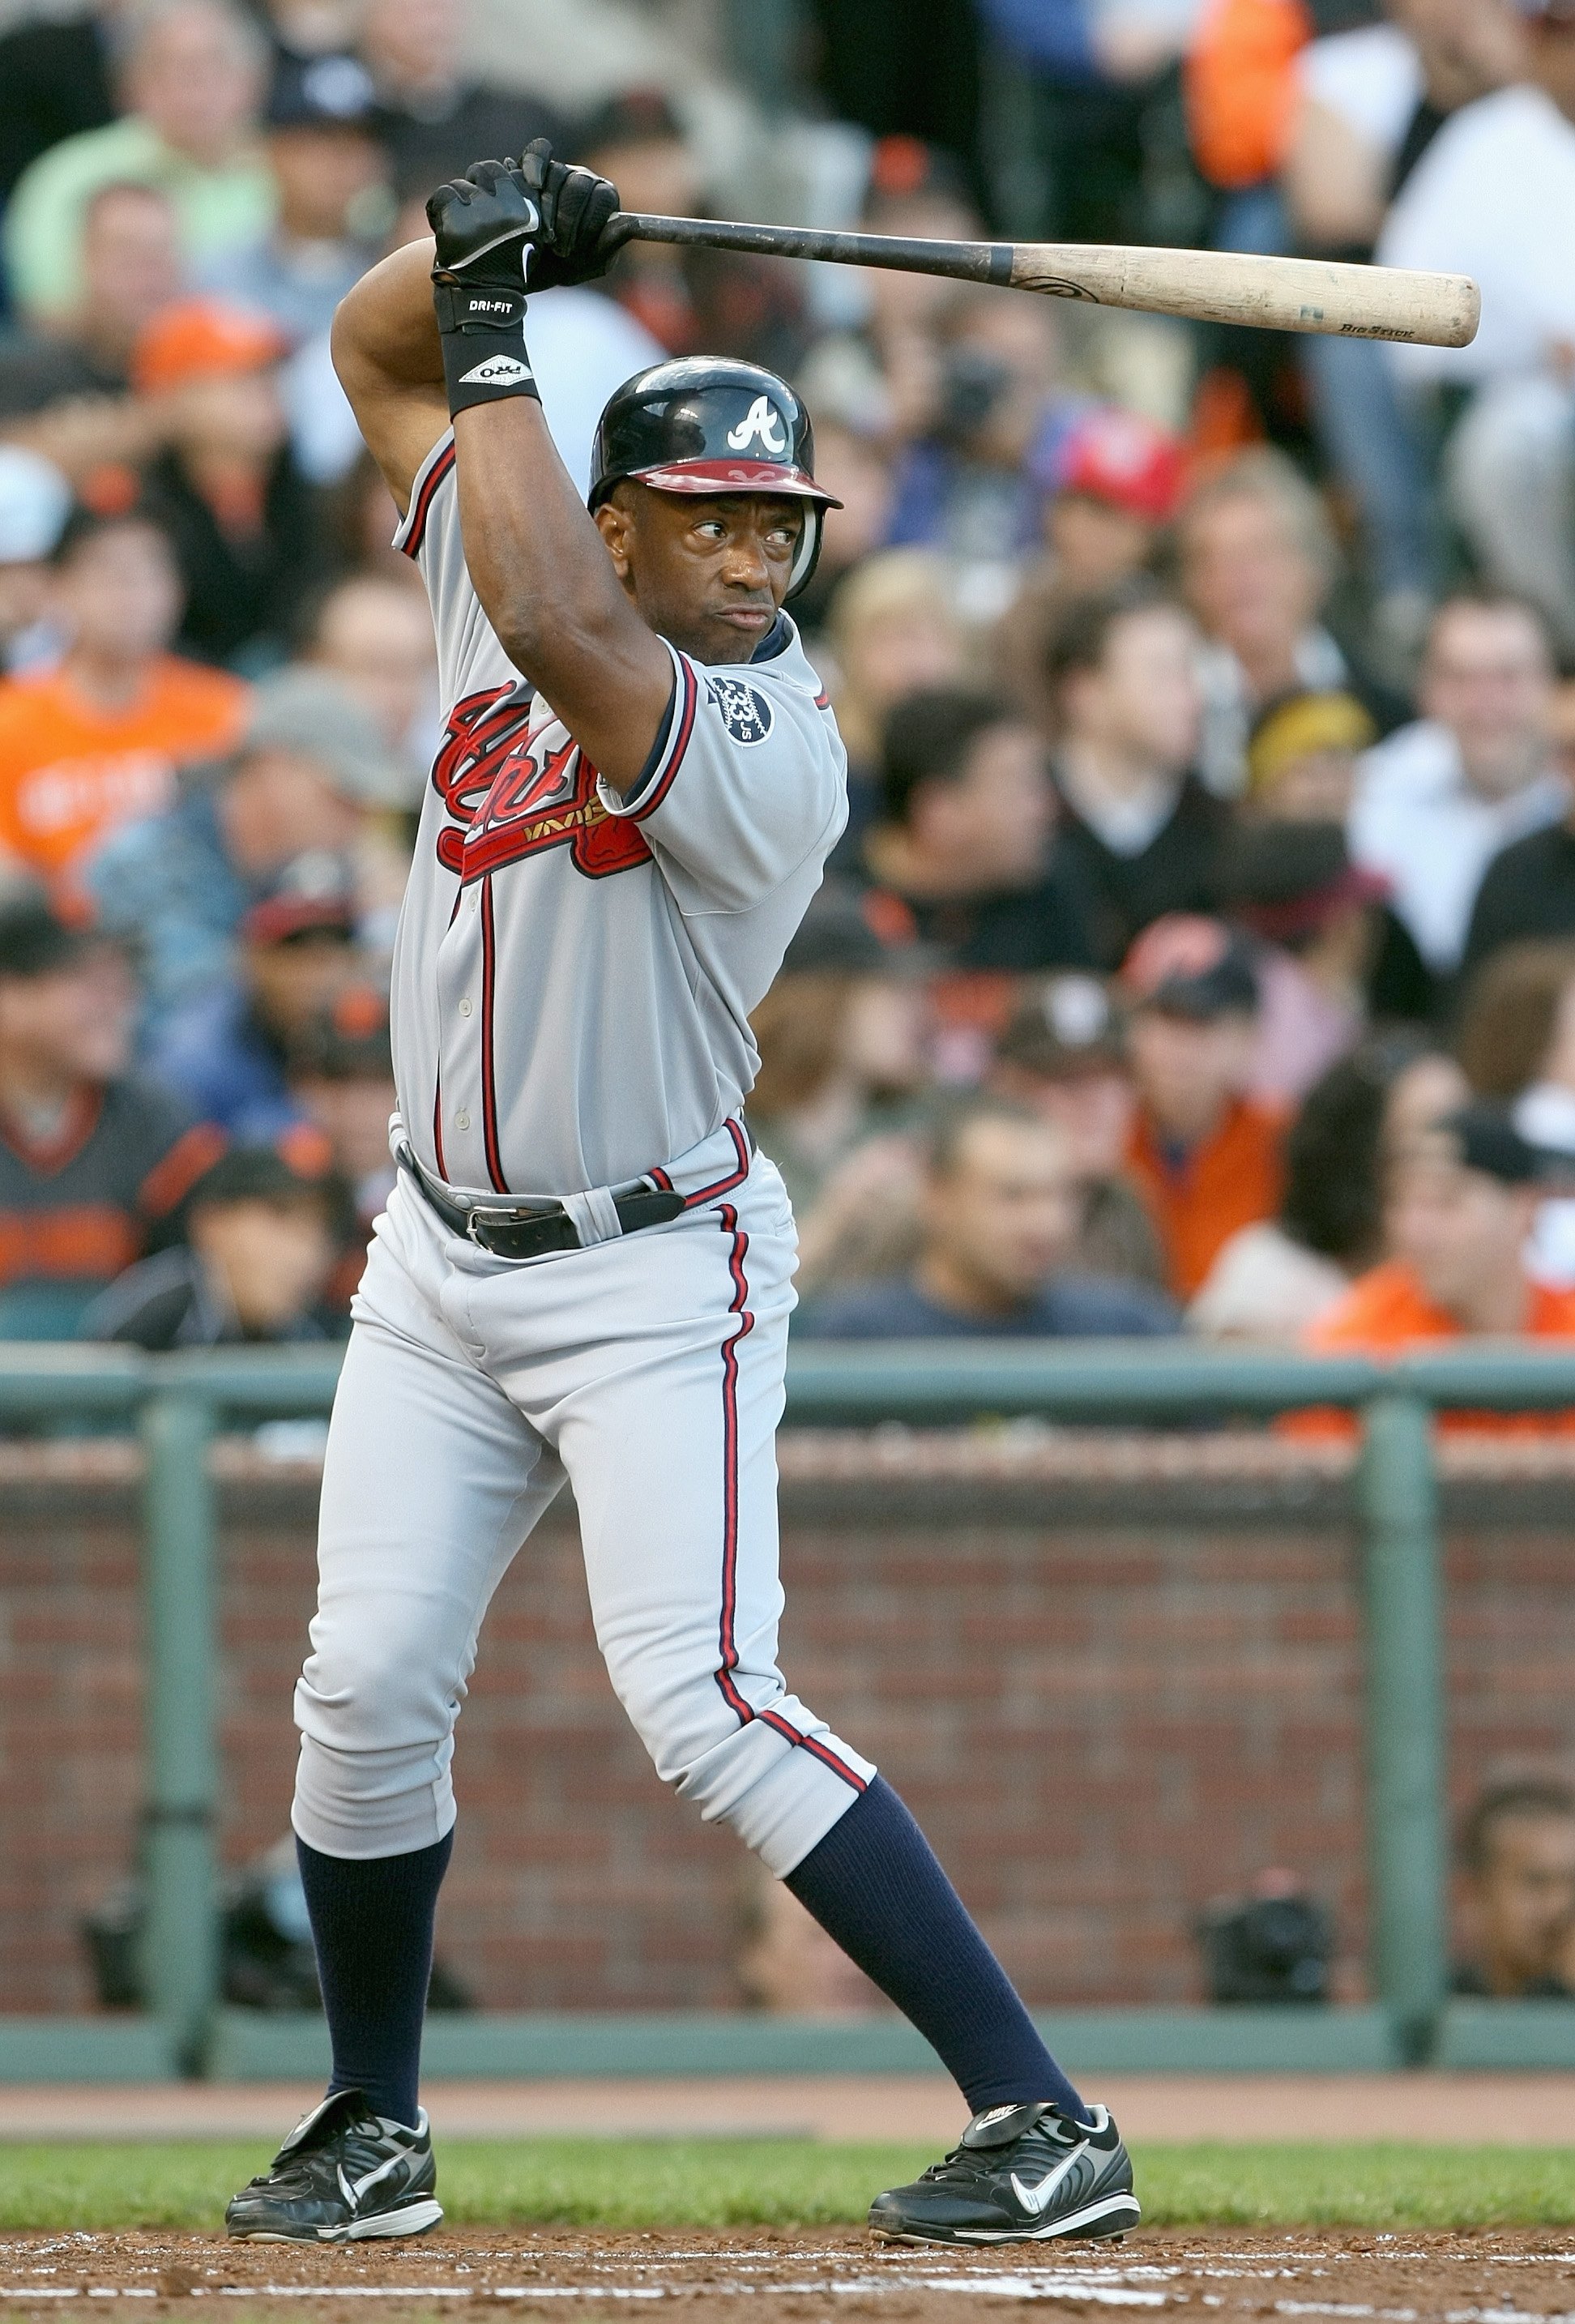 SAN FRANCISCO - JULY 23: Julio Franco #14 of the Atlanta Braves stands ready at bat against the San Francisco Giants on July 23, 2007 at AT&T Park in San Francisco, California. (Photo by Jed Jacobsohn/Getty Images)